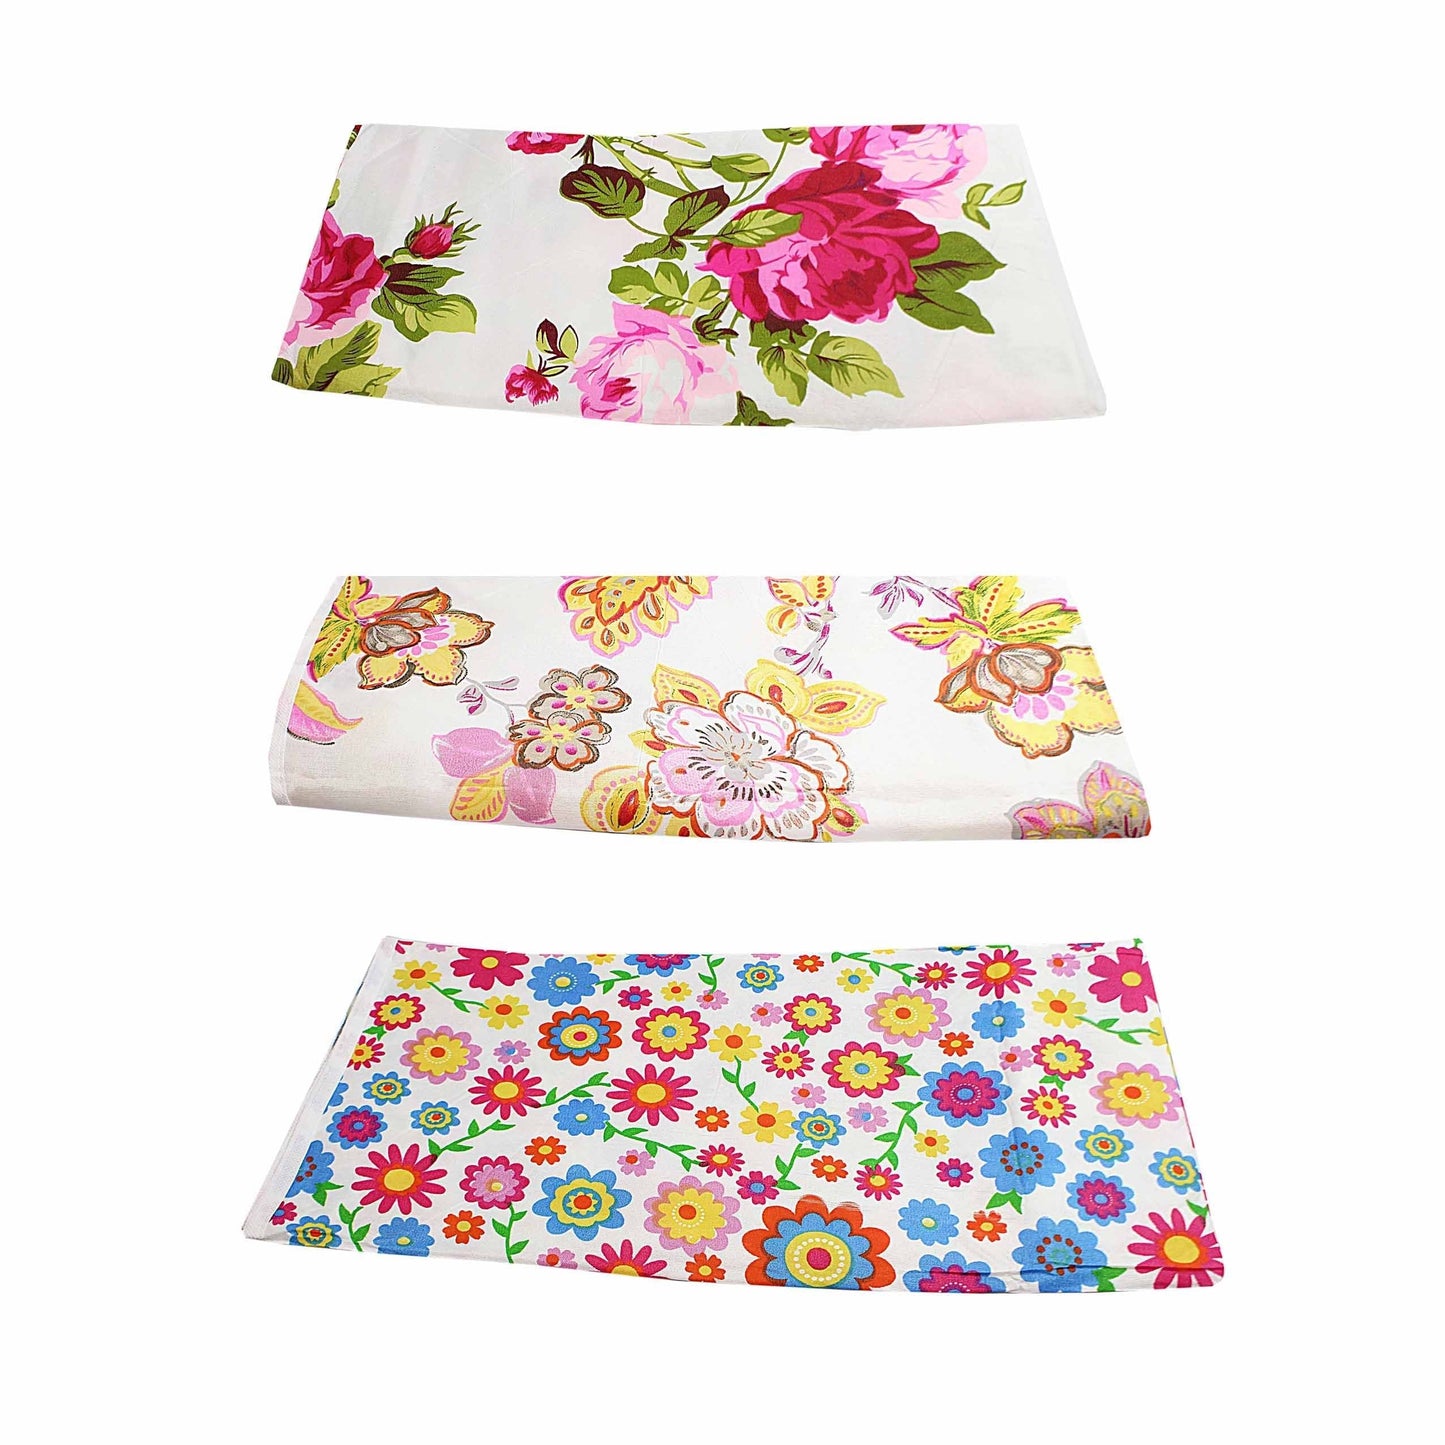 Cushioned Fabric Ironing Board Cover 140 x 50 cm Assorted Designs 2250 (Big Parcel Rate)